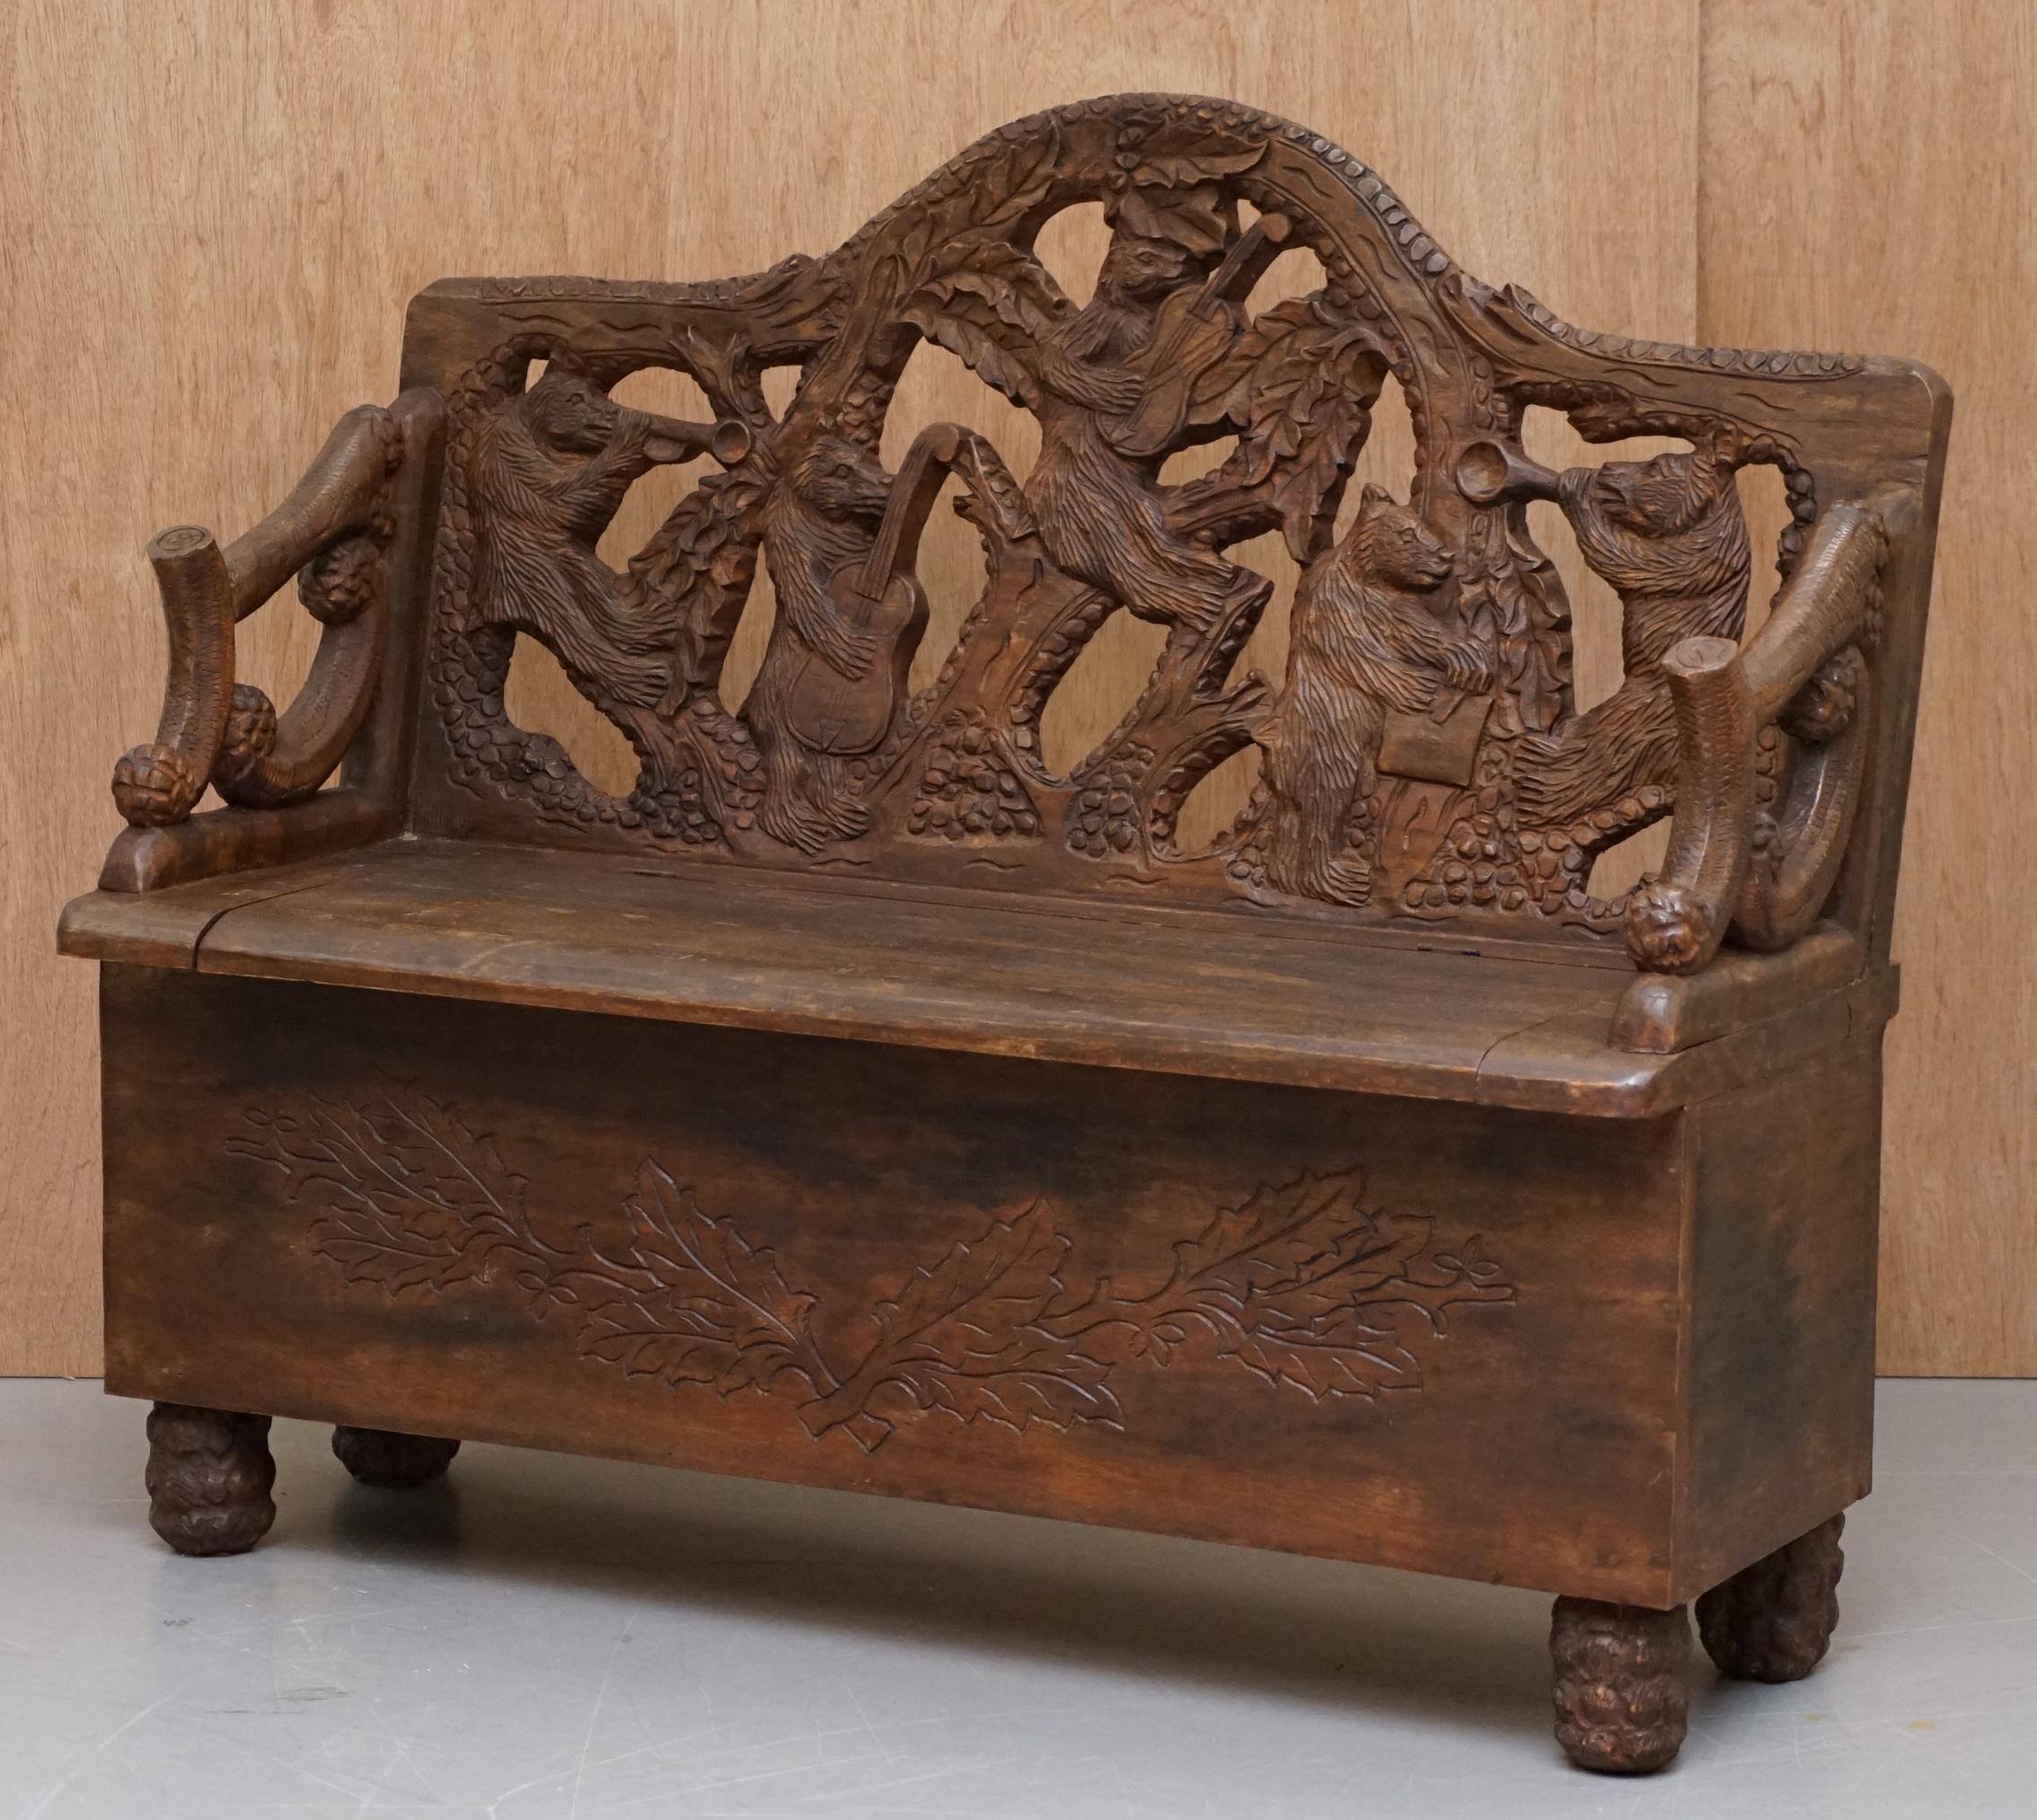 We are delighted to offer for sale this lovely decorative vintage Black Forest wood musical bear bench with internal storage

This bench is part of a suite

The bench is a good looking, decorative and well made piece, its midcentury hence the